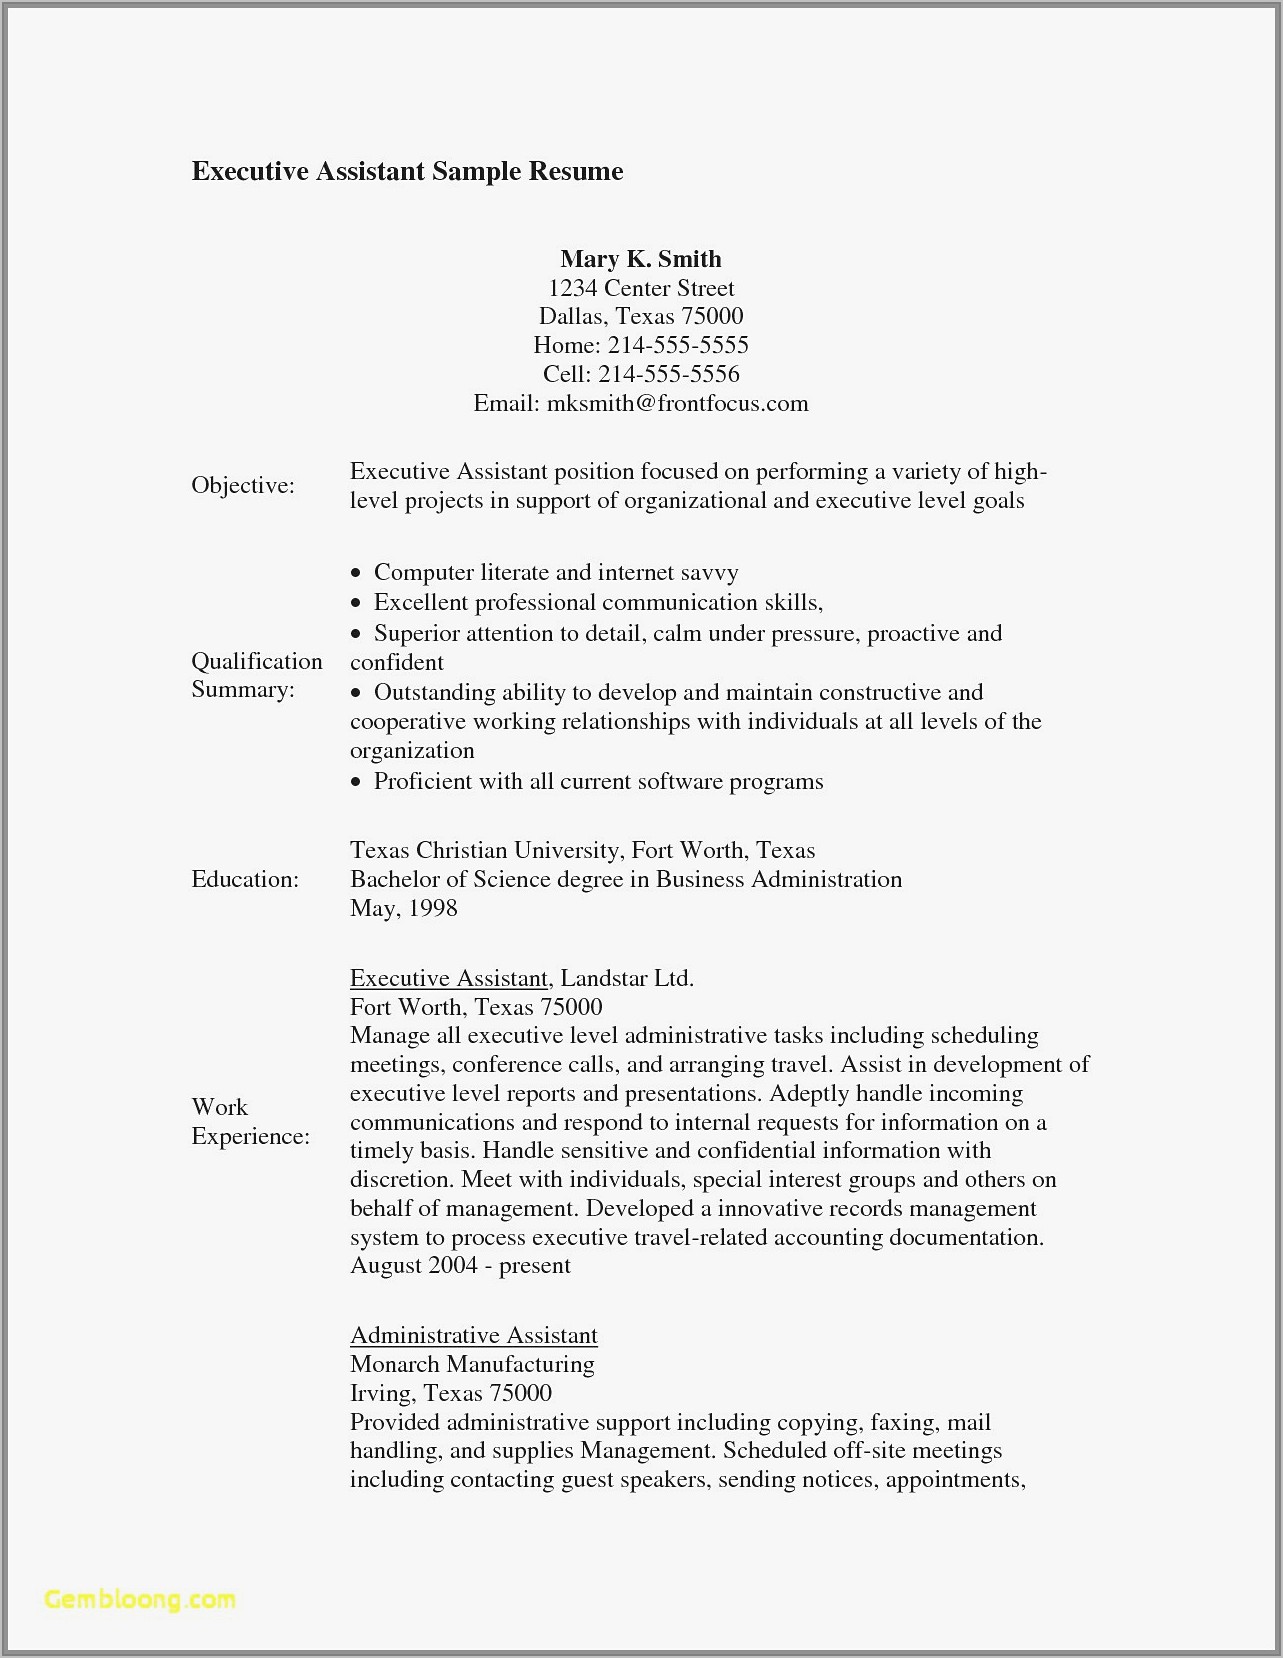 Sample Resumes For Administrative Assistants